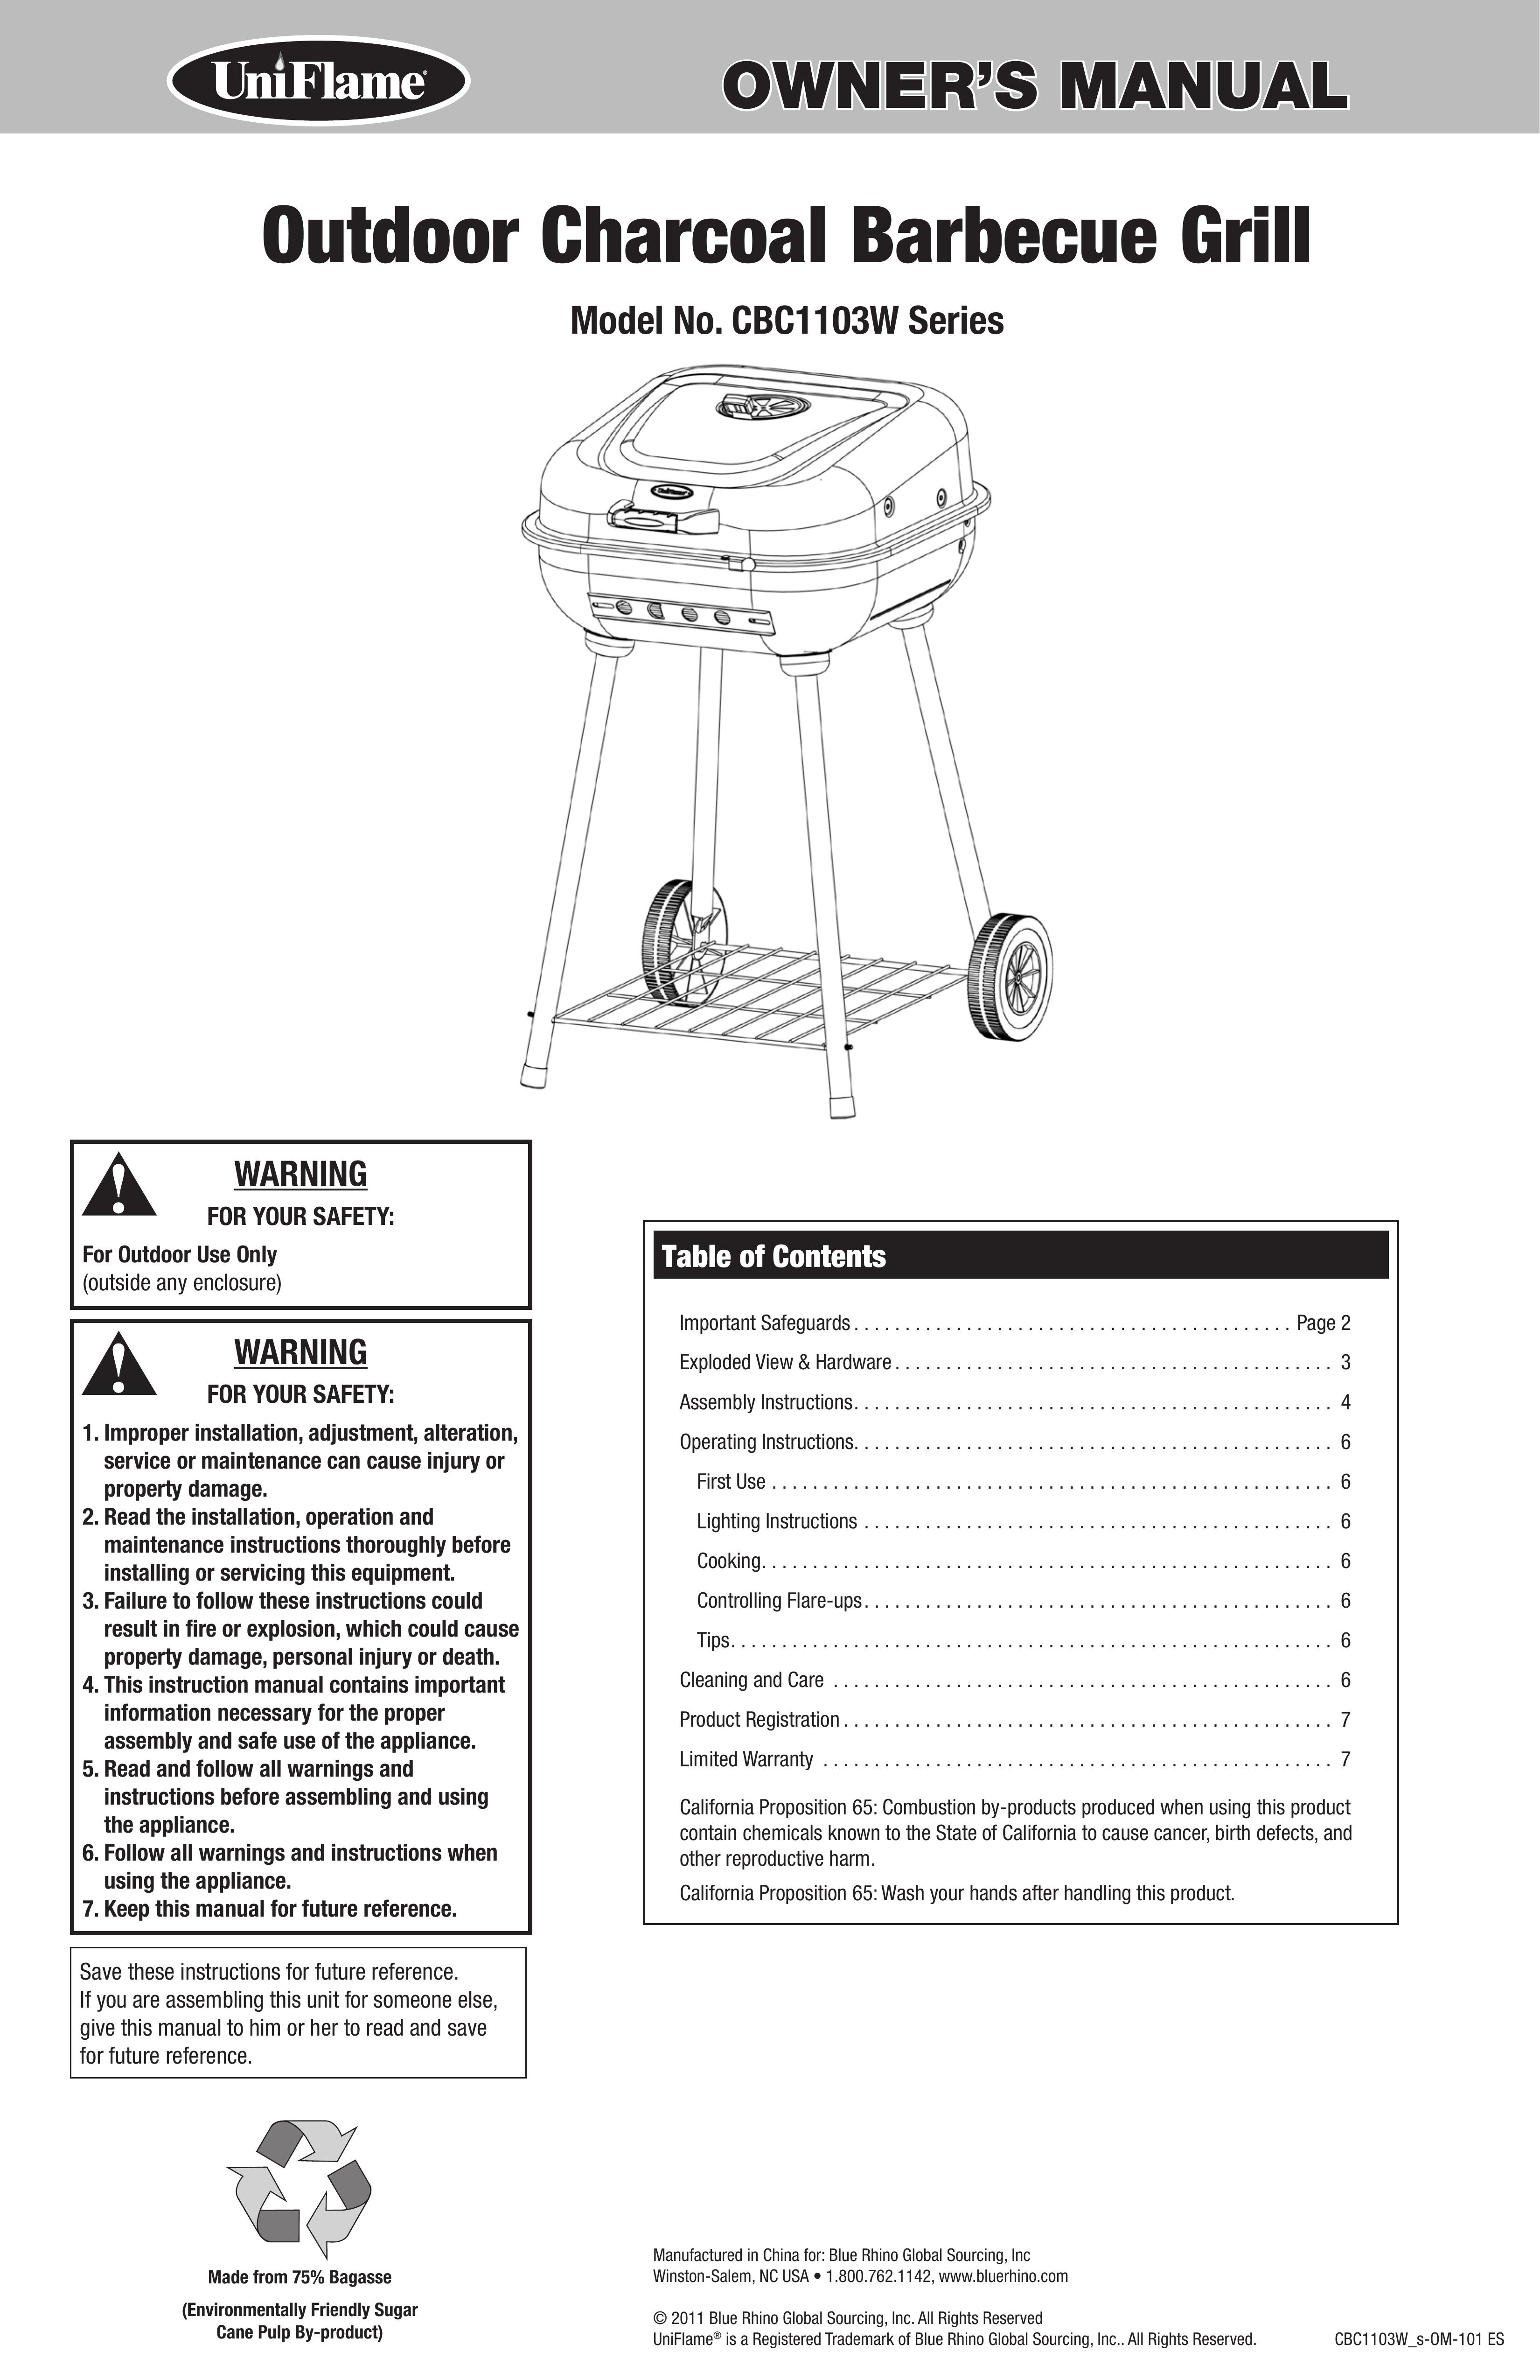 Uniflame CBC1103W Charcoal Grill User Manual